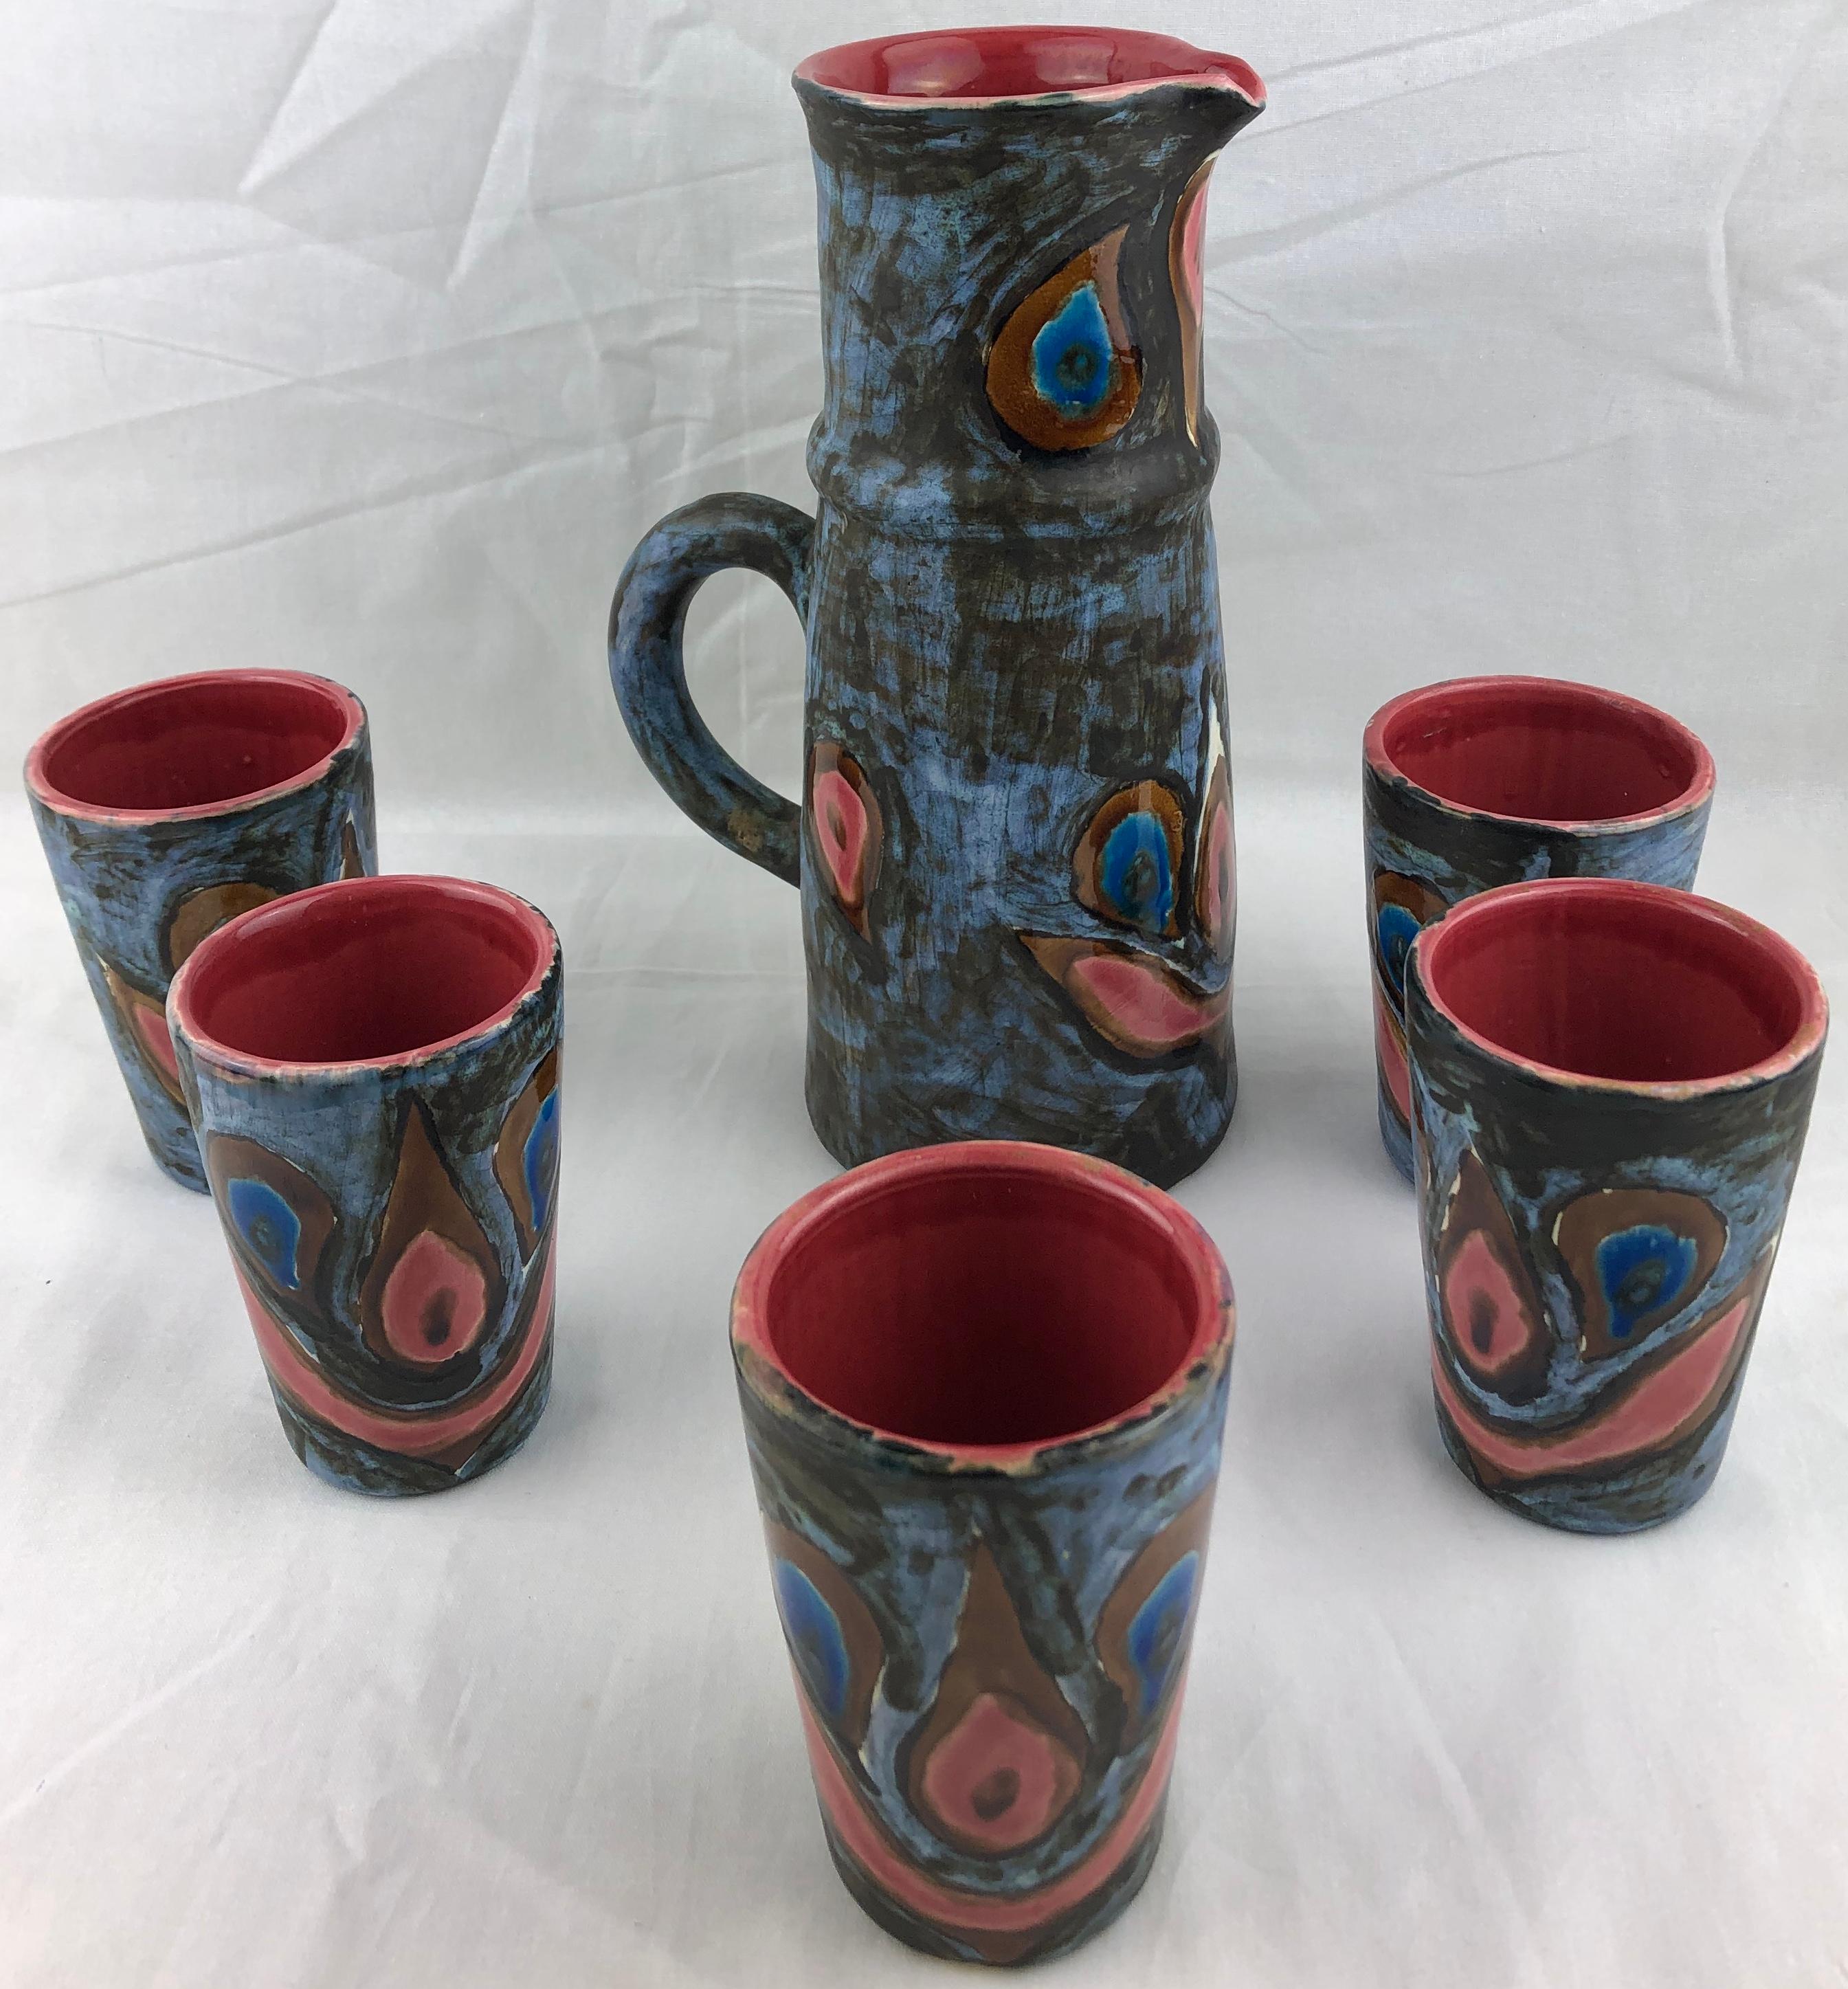 Beautifully crafted ceramic pottery pitcher and five cups with stunning colors.
Handcrafted in Vallauris, France using traditional pottery making techniques, circa mid-1950s. 
Most commonly used as a lemonade set but can be used to serve any of your